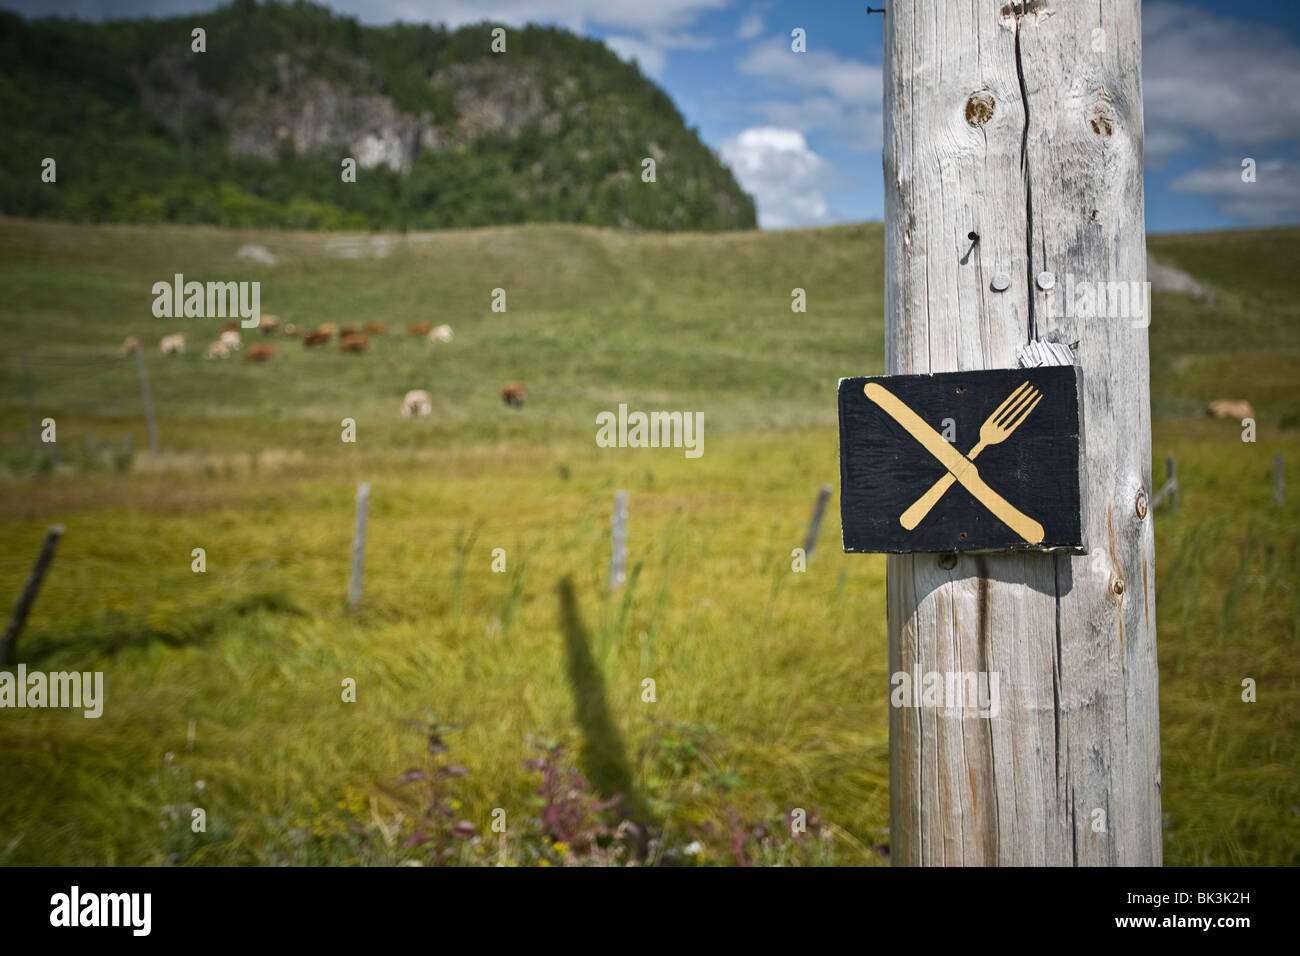 A sign with a knife and fork, with a herd of cows in the background. Stock Photo